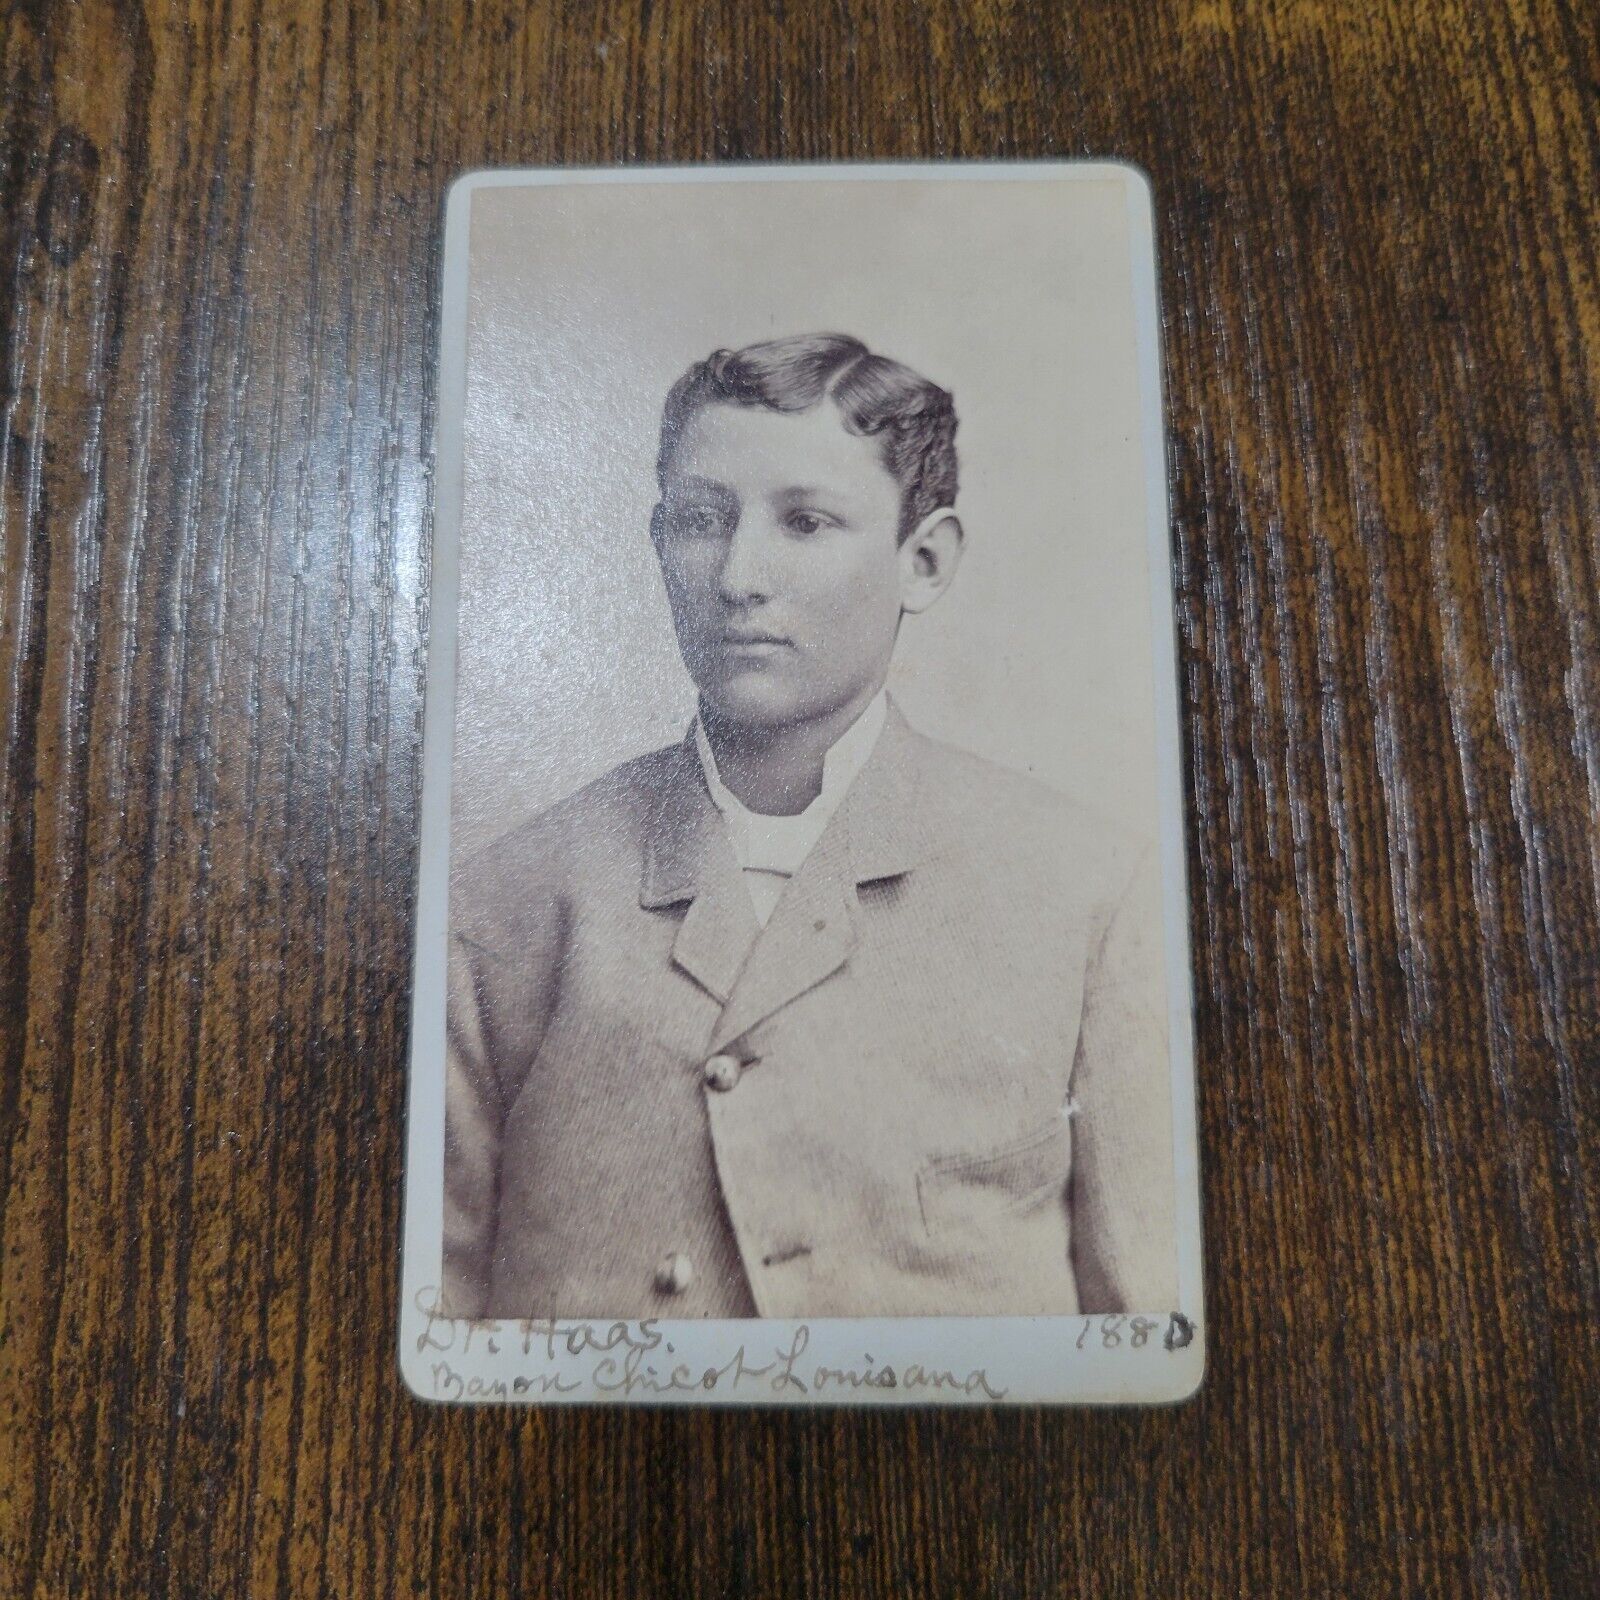 Dr Haas Bayou Chicot Cabinet Card Photo 4x2.5 In